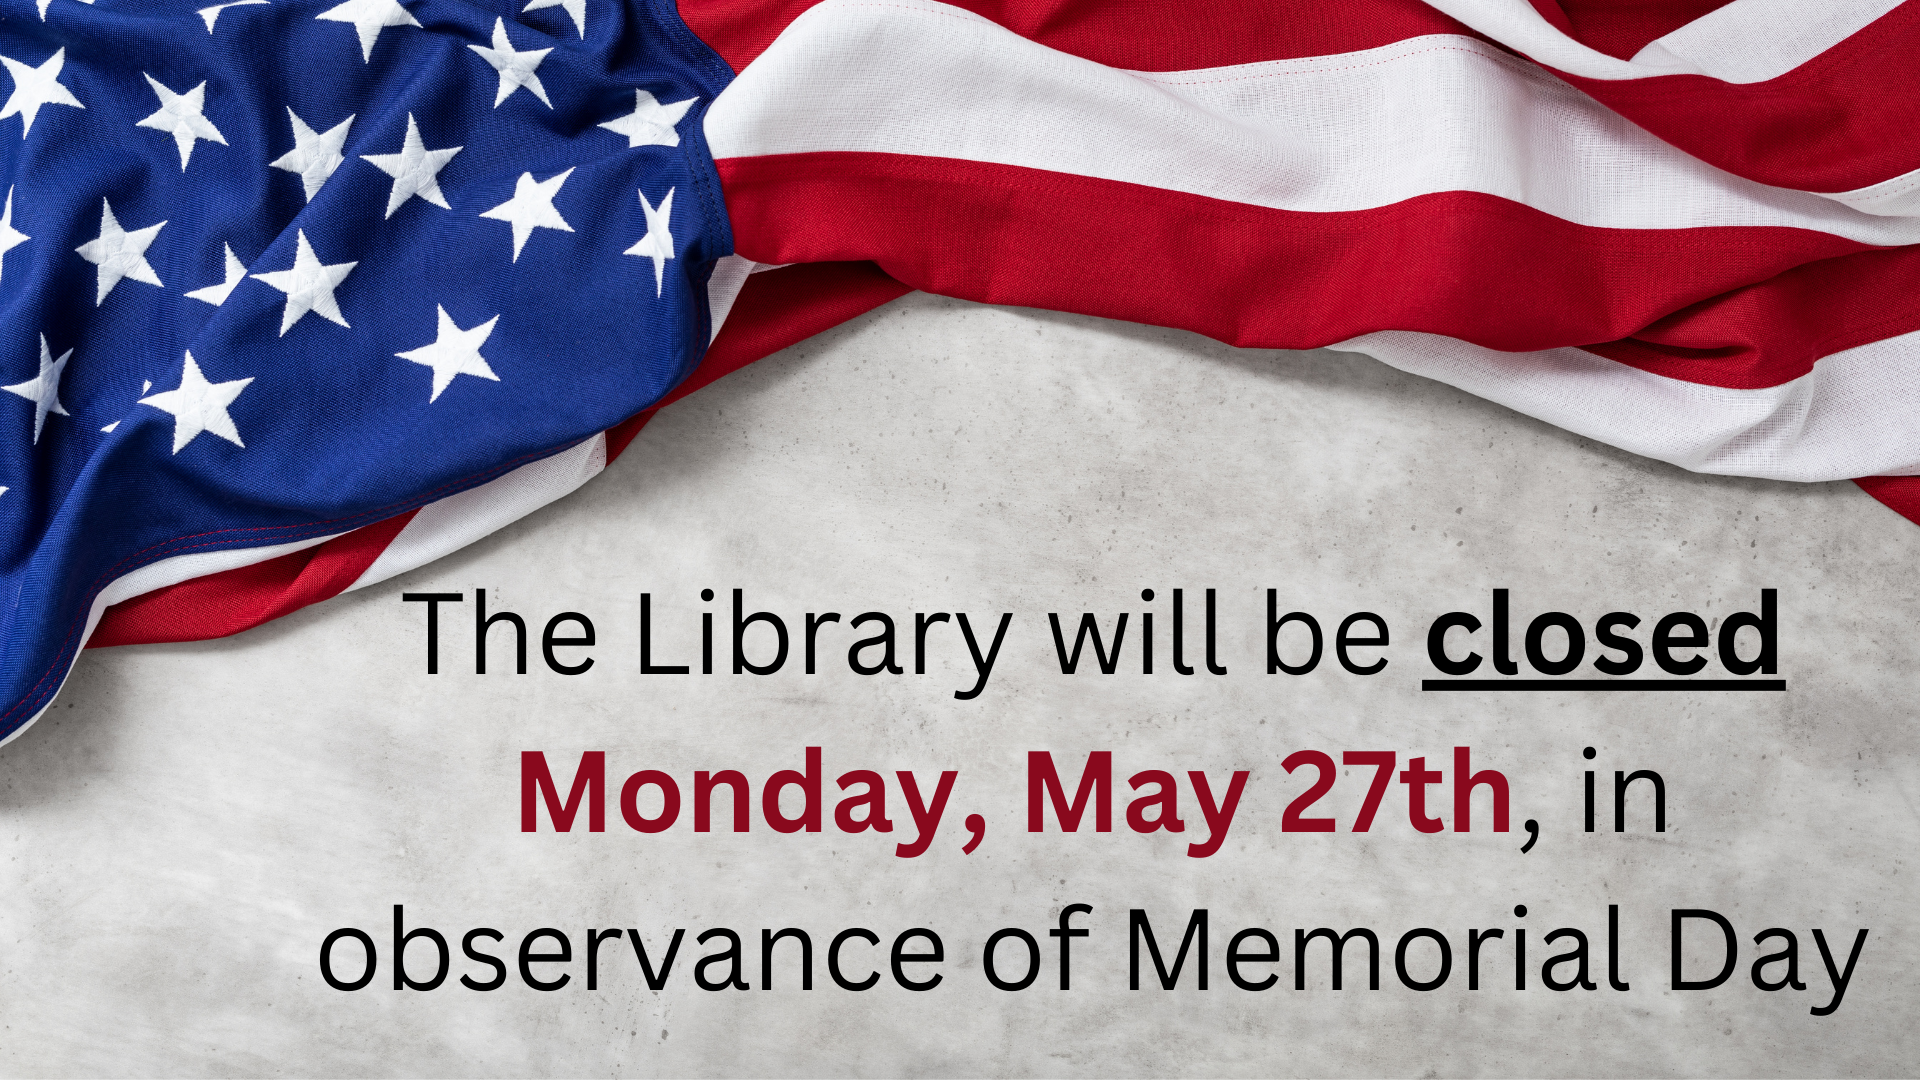 The library will be closed Monday, May 27, in observance of Memorial Day